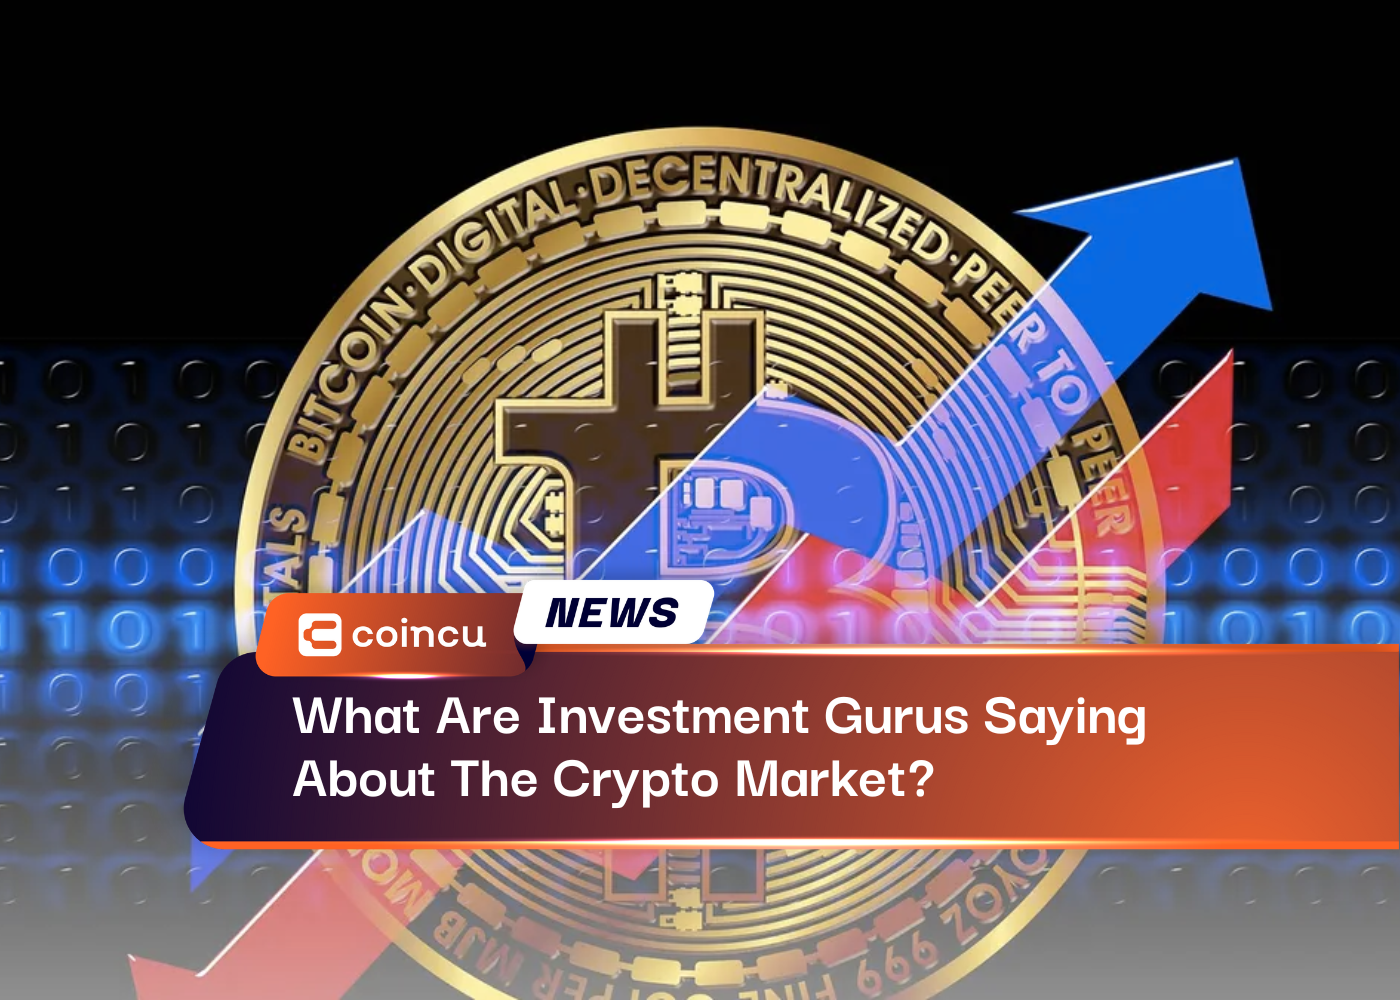 What Are Investment Gurus Saying About The Crypto Market?